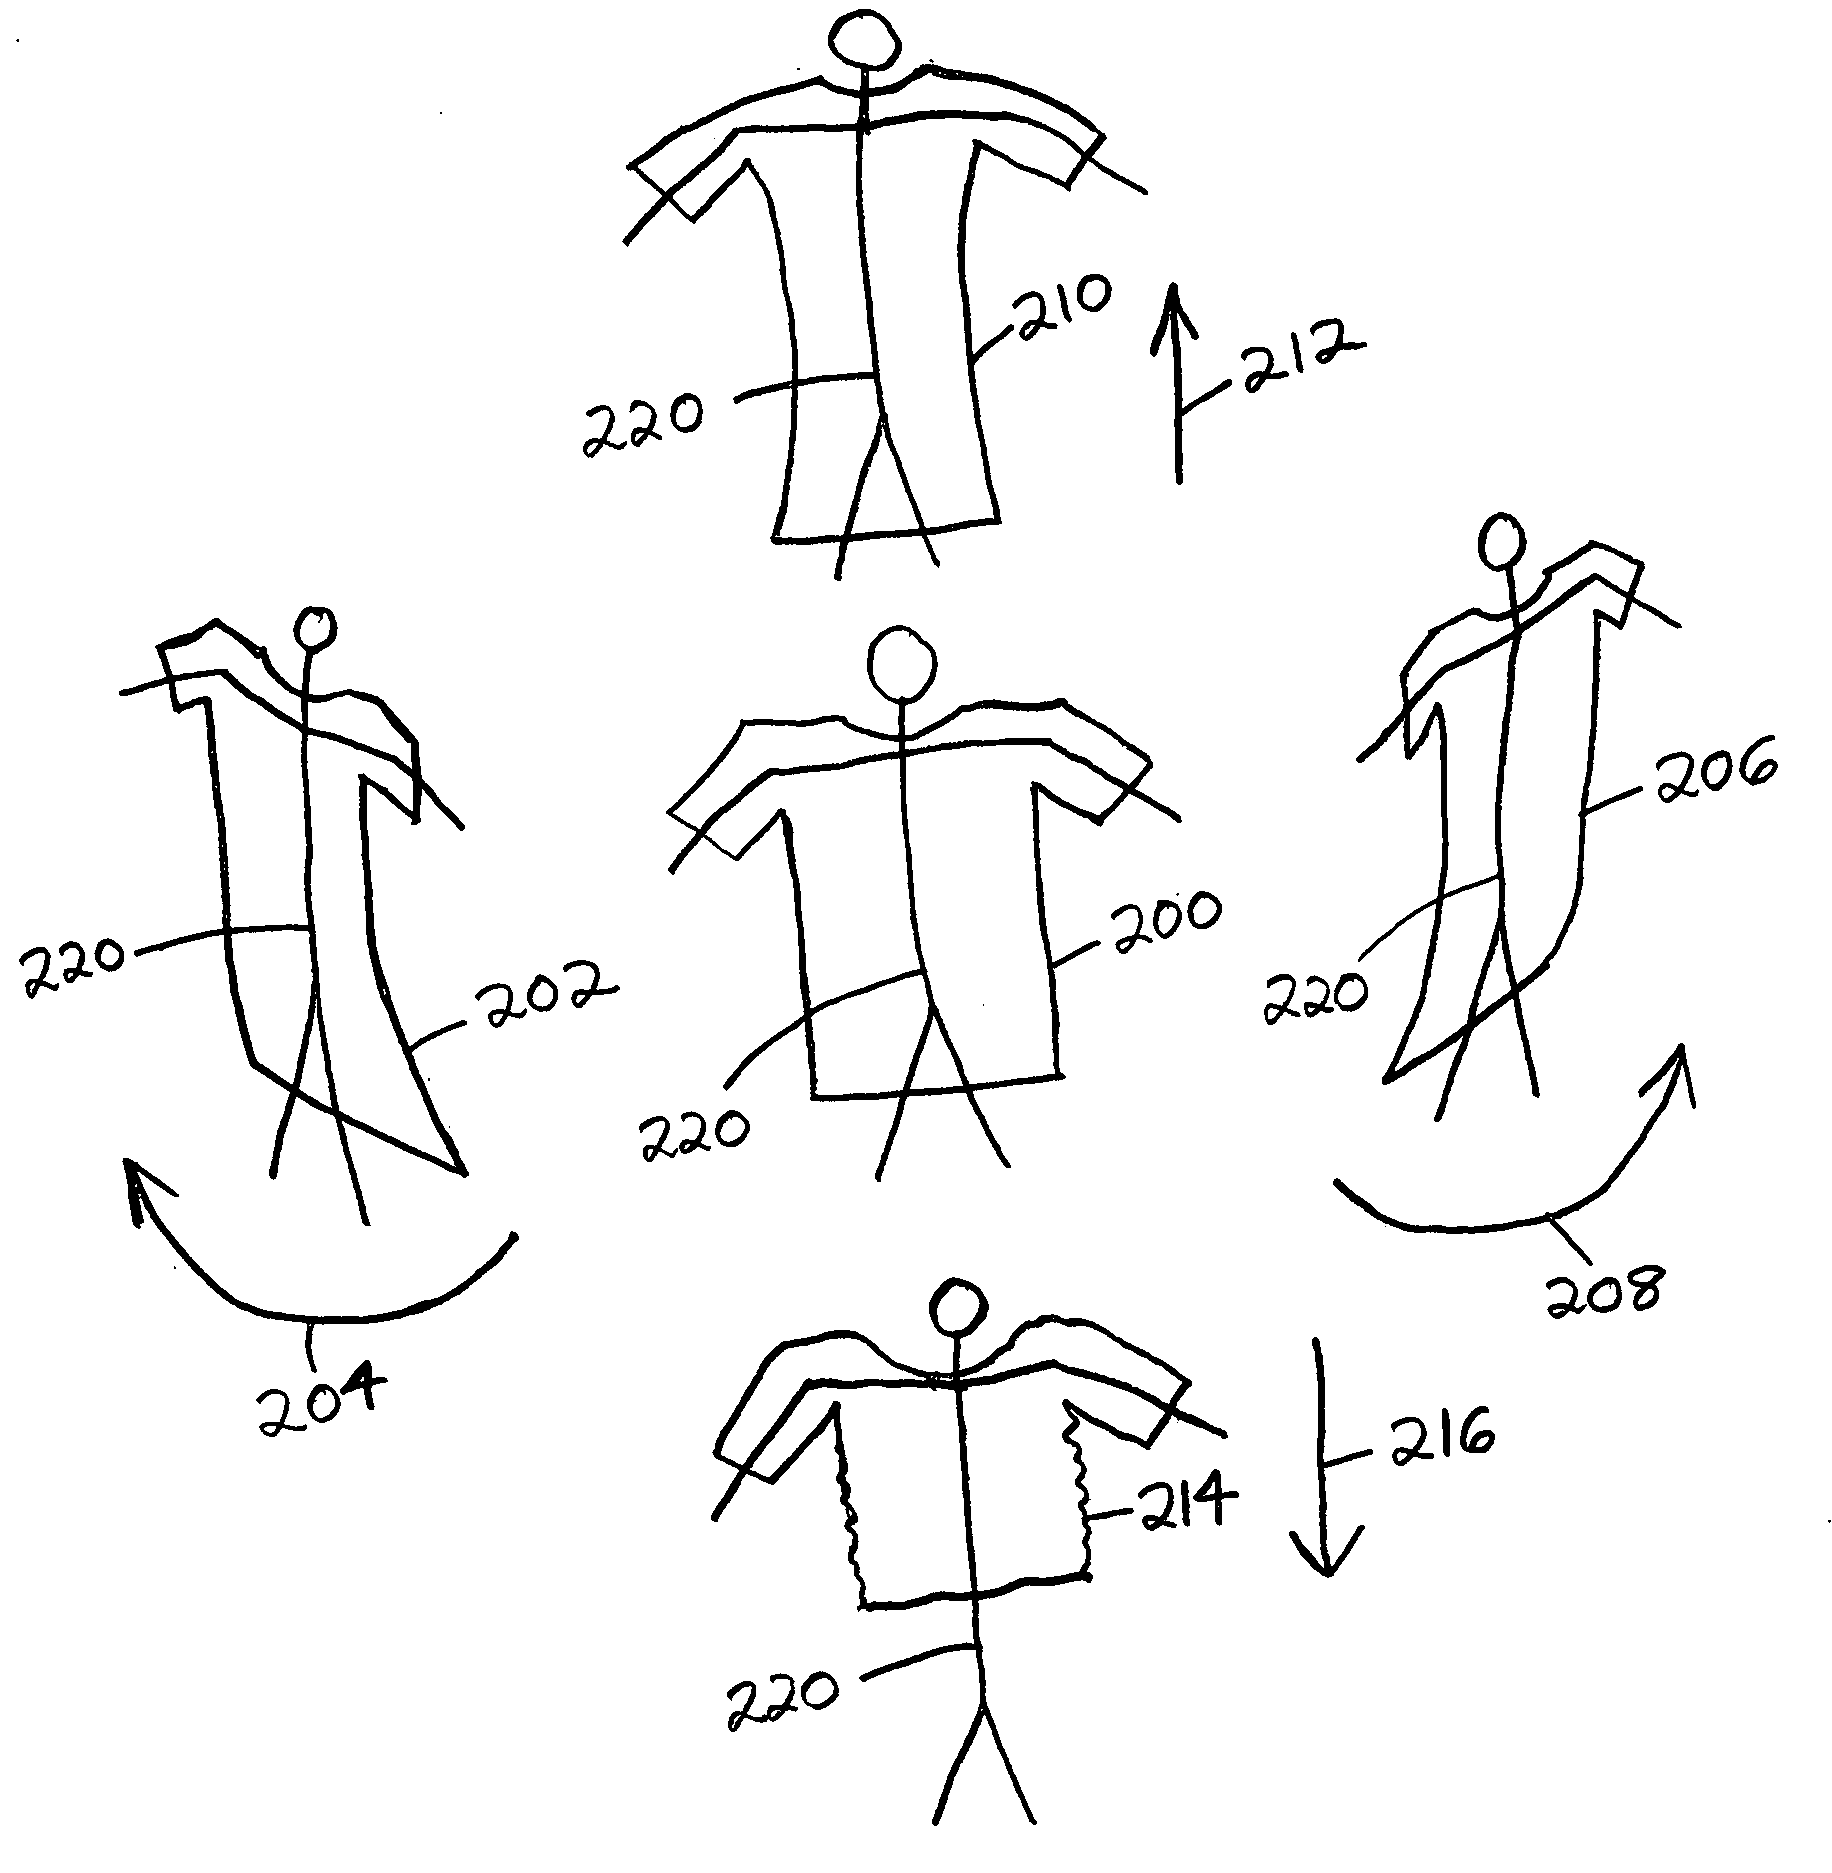 Polynomial encoding of vertex data for use in computer animation of cloth and other materials